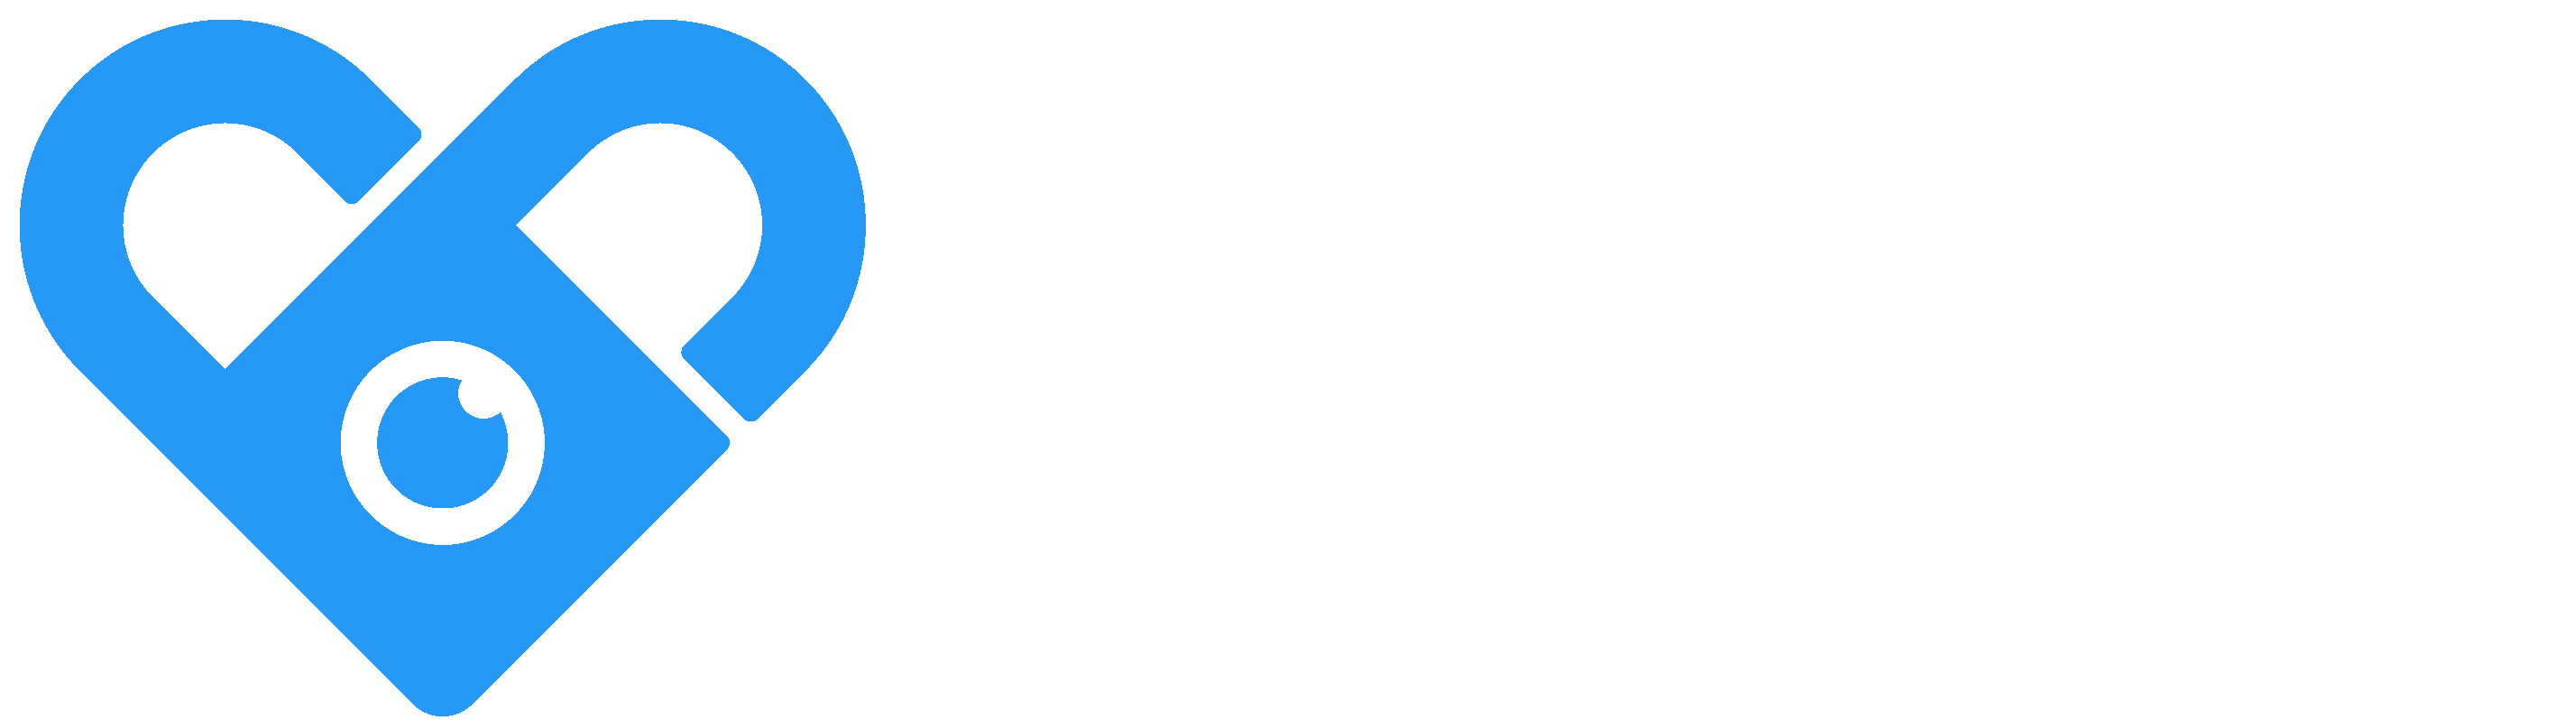 Fansly - Start Interacting With Your Fans.